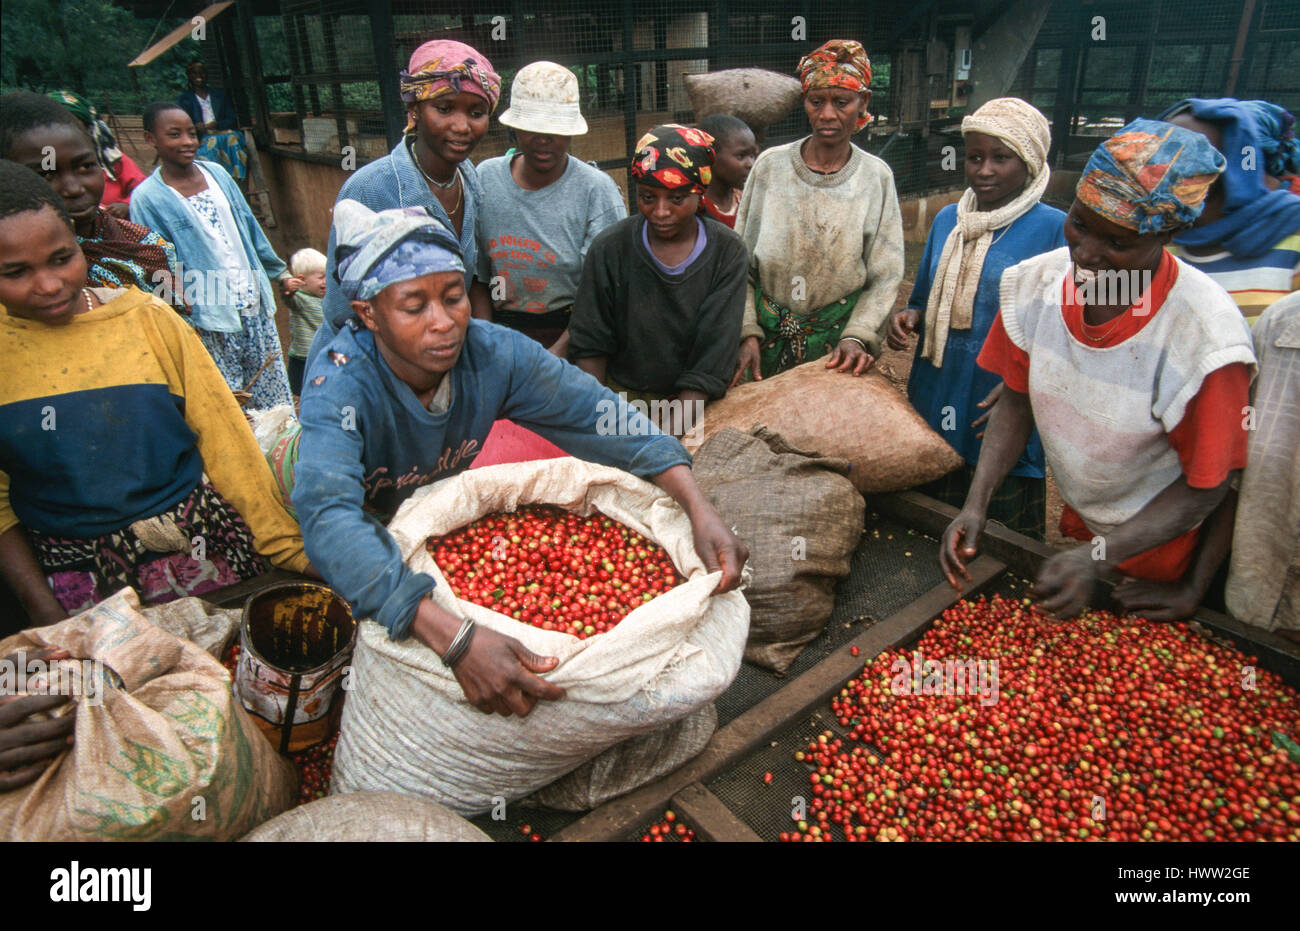 A coffee picker brings a bag with coffee berries to the sorting table, Machame, Kilimanjaro, Tanzania Stock Photo